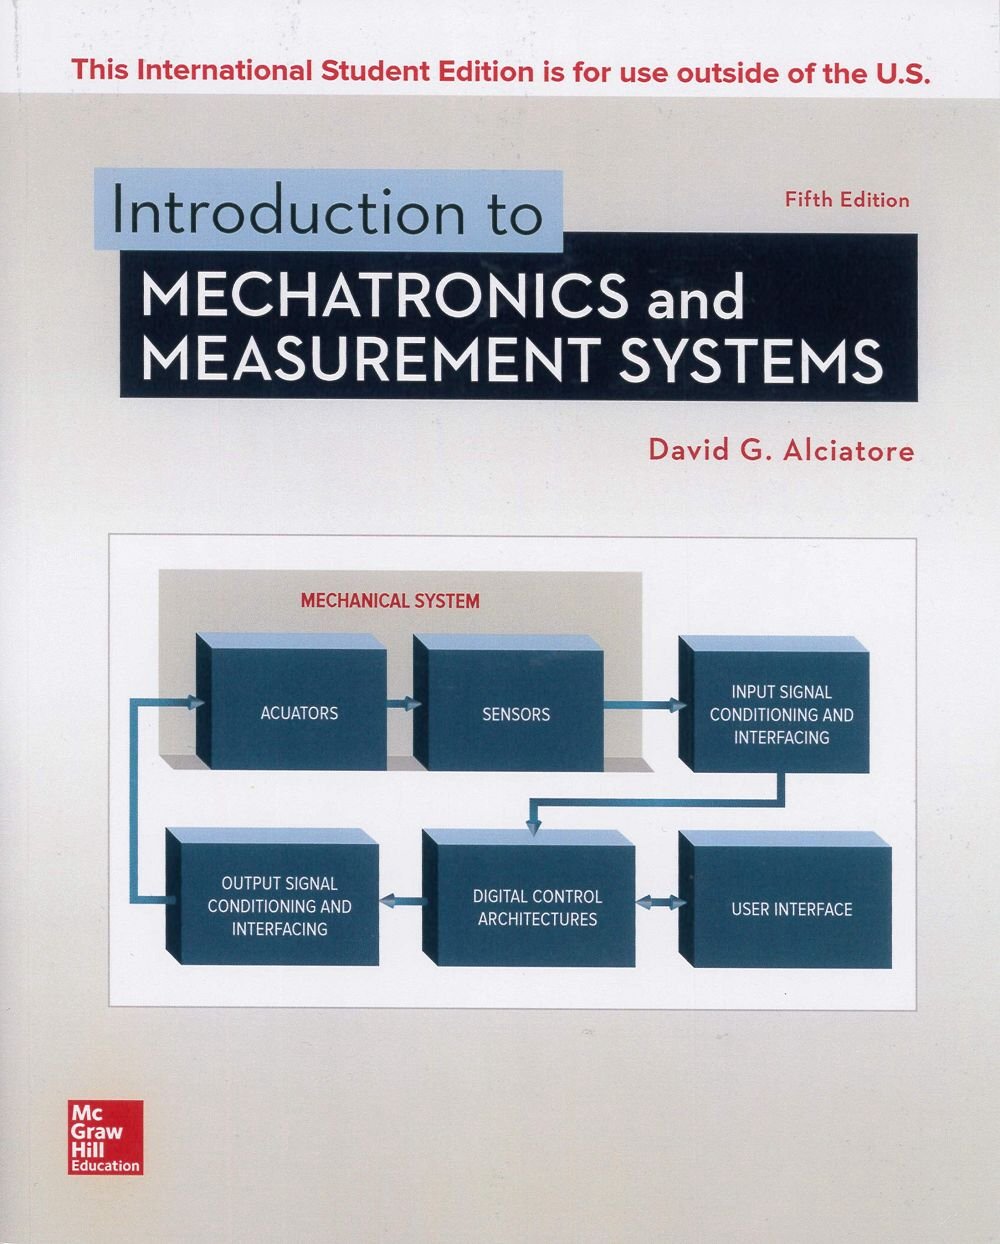 Introduction to Mechatronics a...